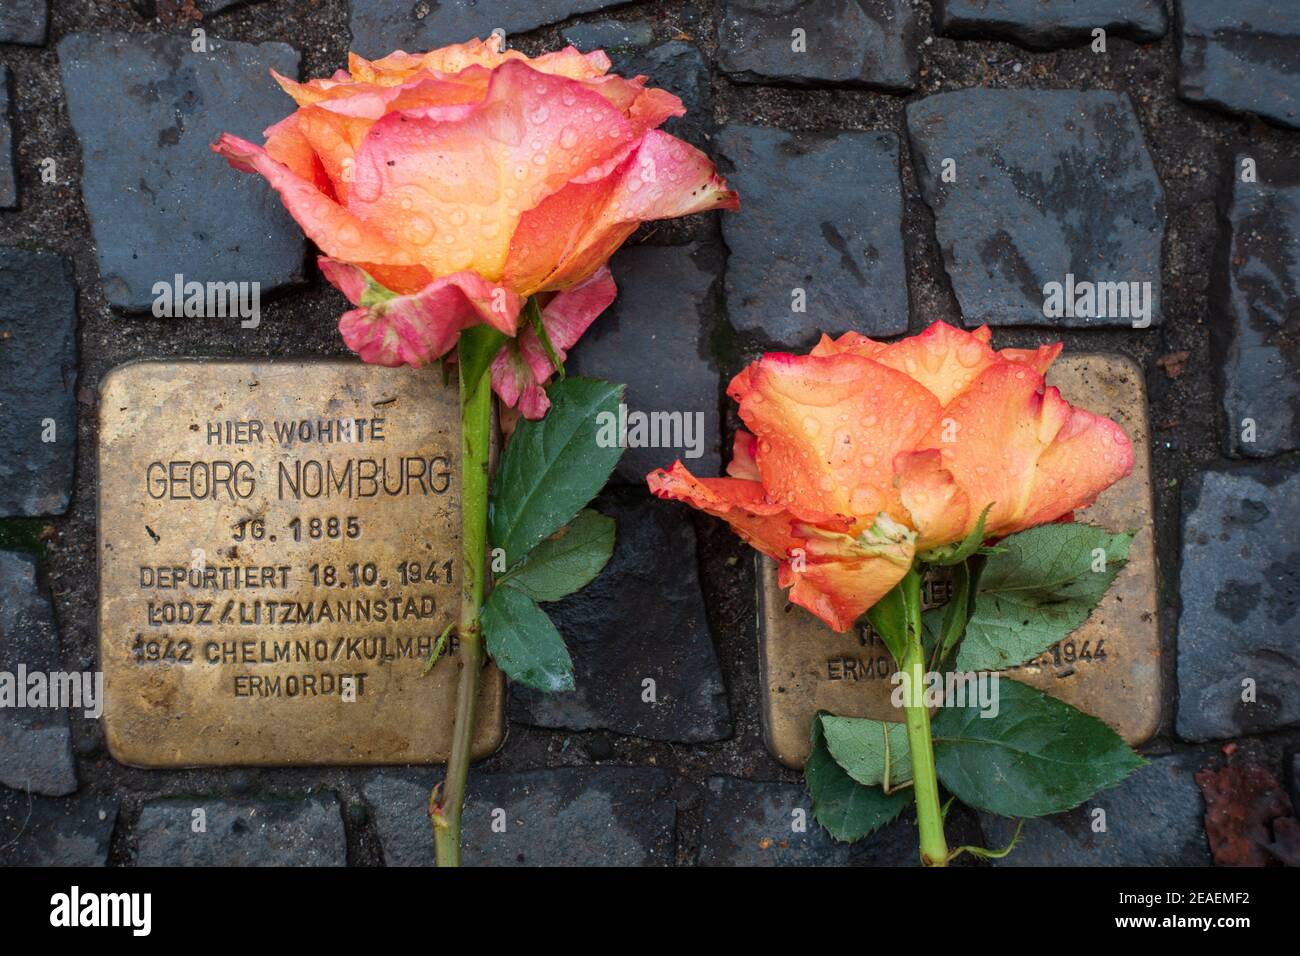 Roses laid on Stolperstein memorials to Holocaust victims in Berlin Stock Photo